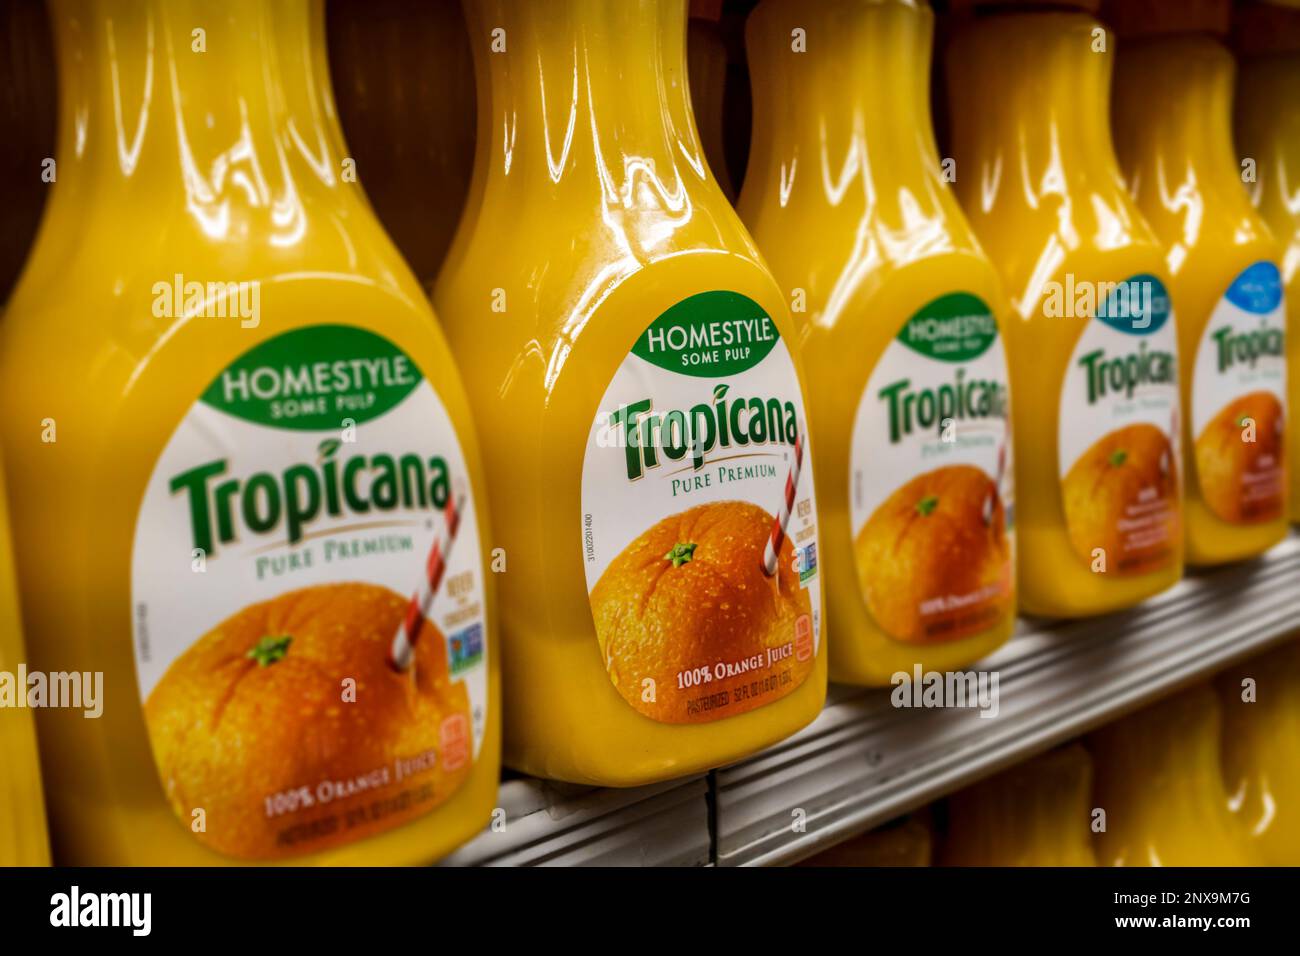 Bottles of Tropicana orange juice are seen in a supermarket refrigerator case in New York on Tuesday, February 21, 2023. Florida orange production is reported to be down 61% compared to last year, ergo prices have gone up. Tropicana is owned by PAI Partners with 39% still retained by Pepsico. (© Richard B. Levine) Stock Photo